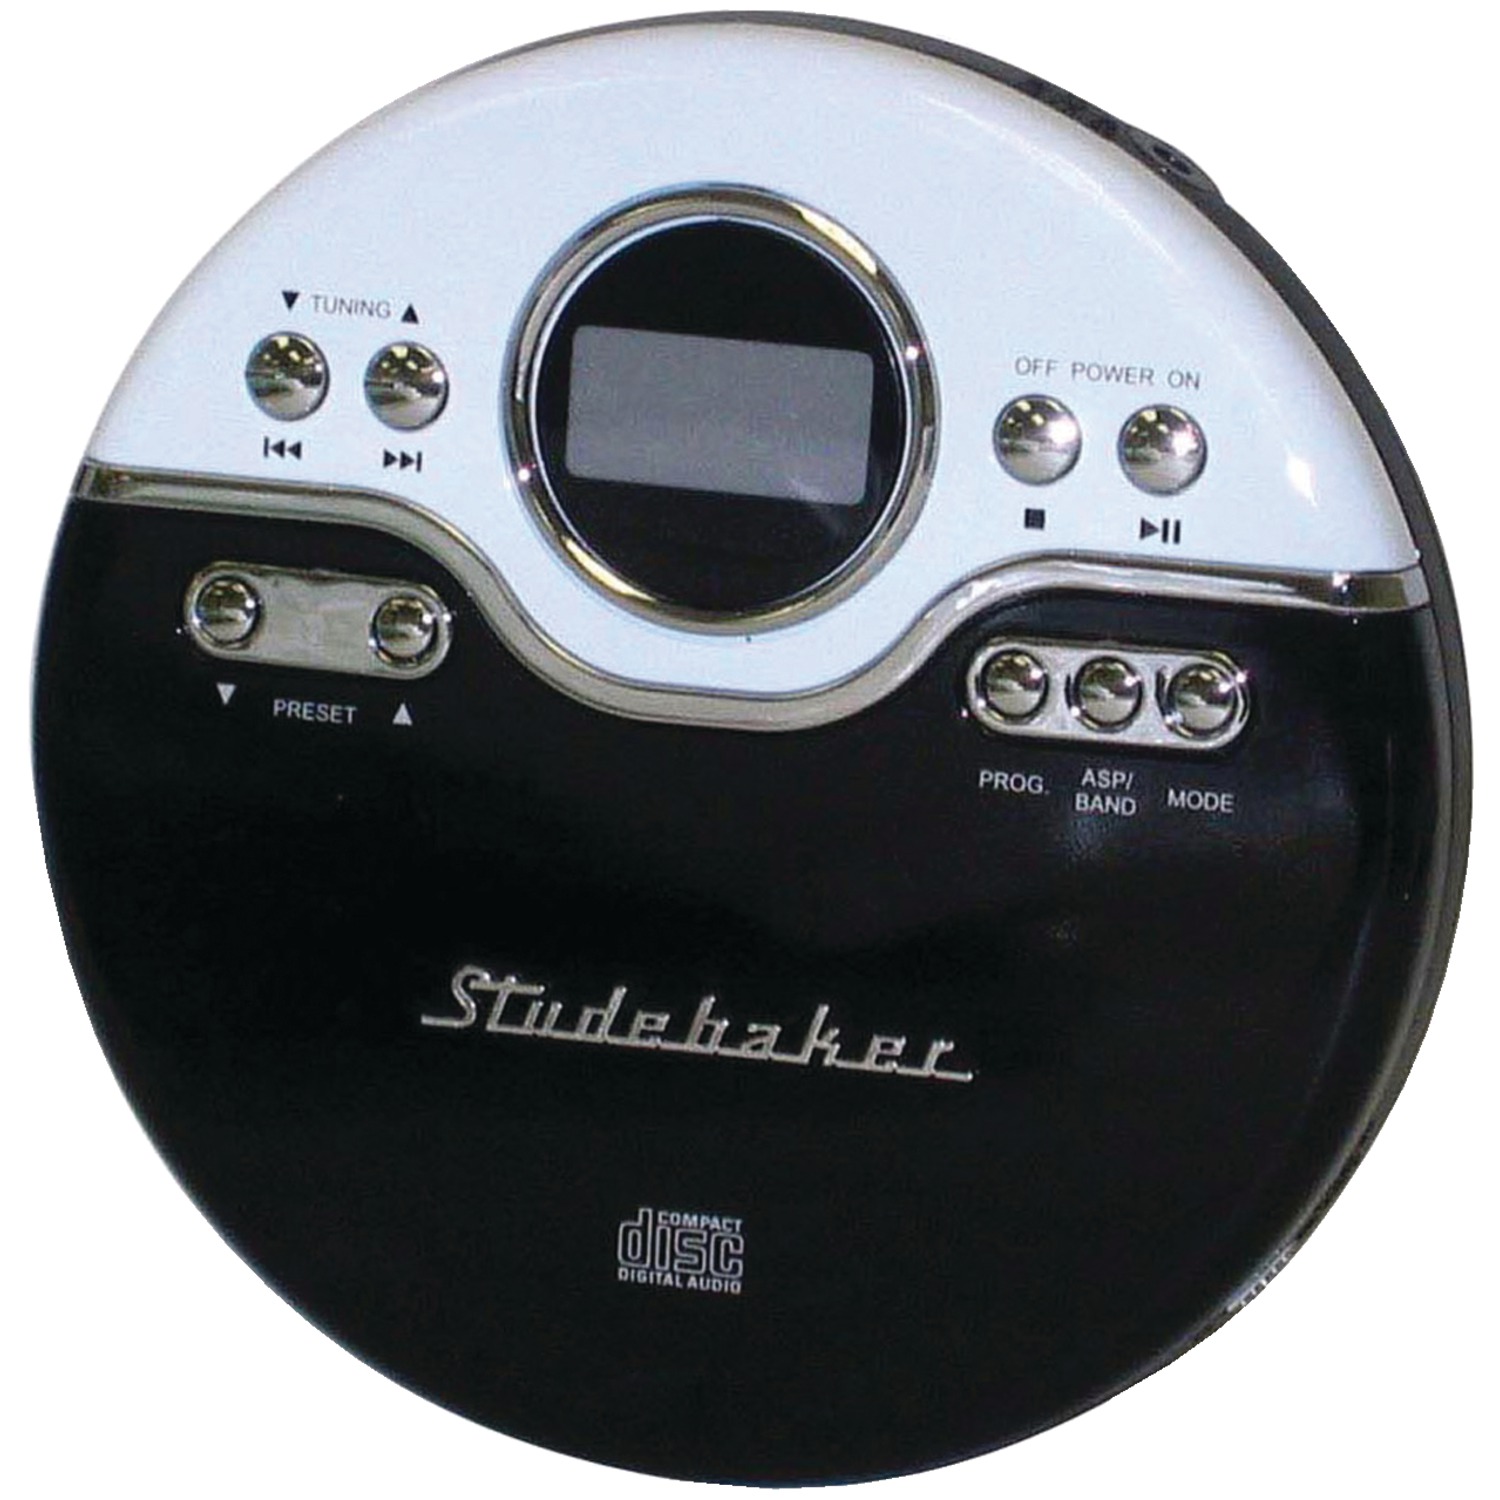 Studebaker SB3703BW Personal Jogging CD Player with FM PLL Radio (Black/White) - image 1 of 1